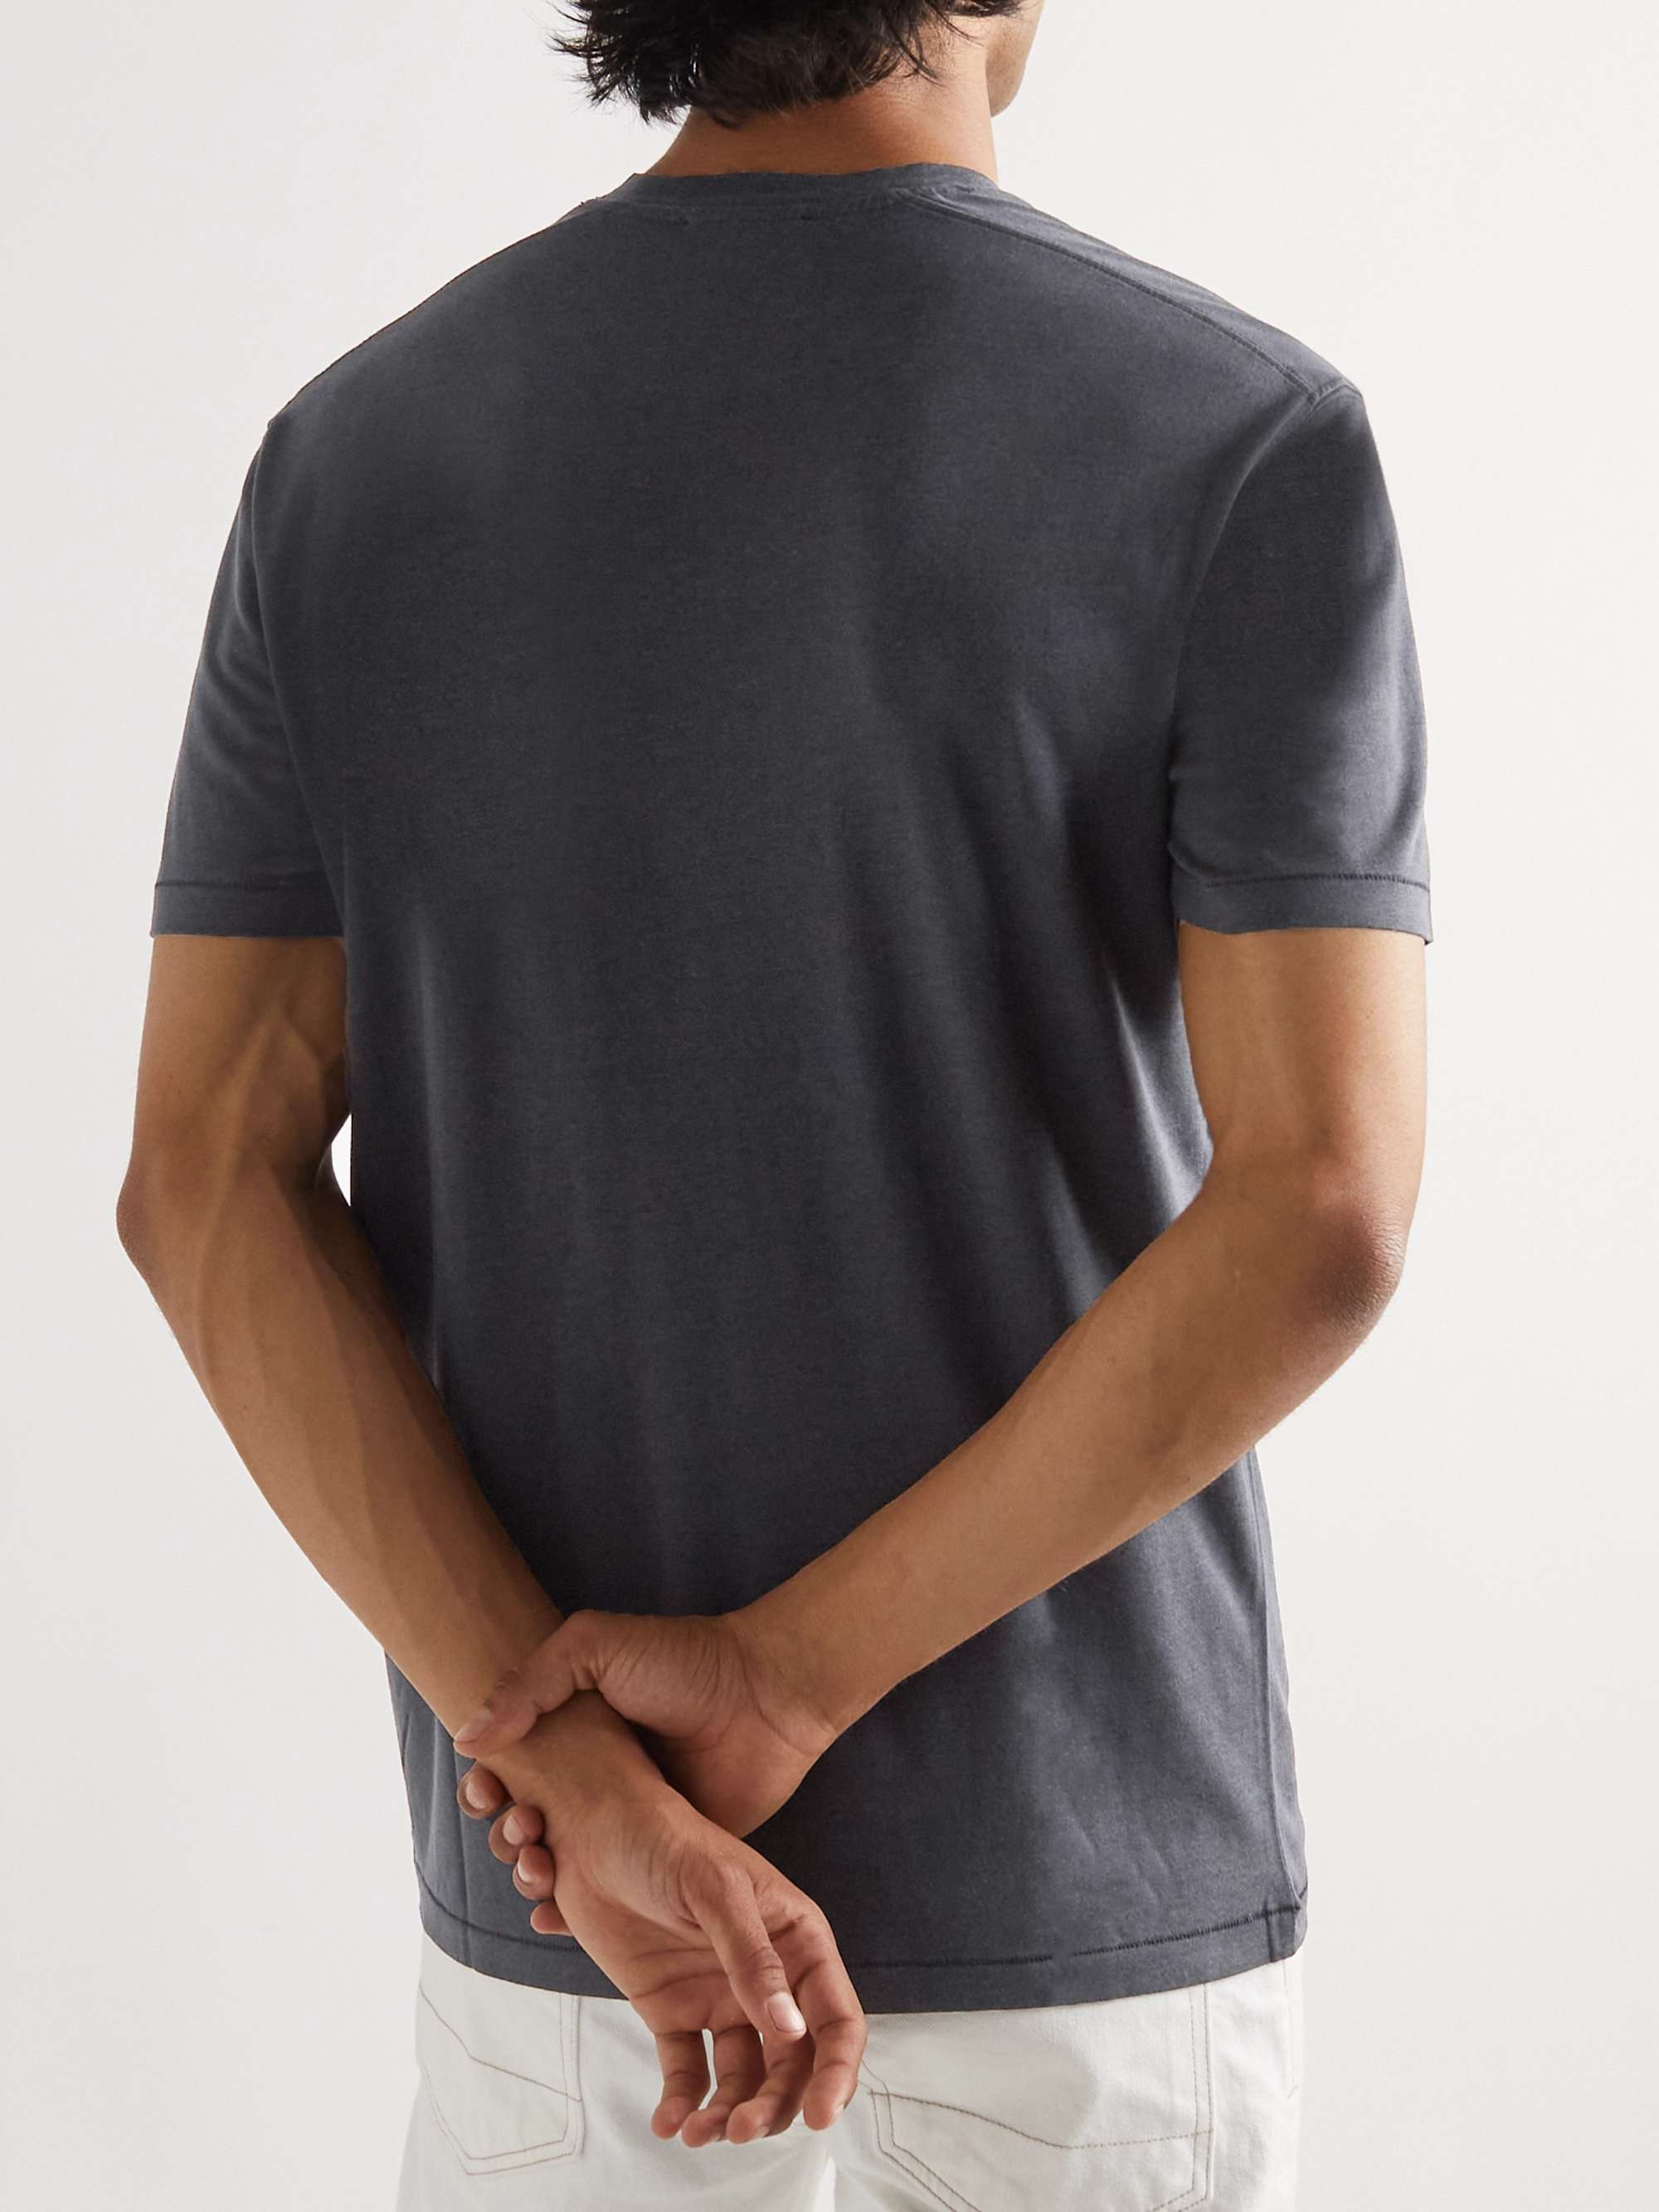 Black Lyocell and Cotton-Blend Jersey T-Shirt | TOM FORD | MR PORTER